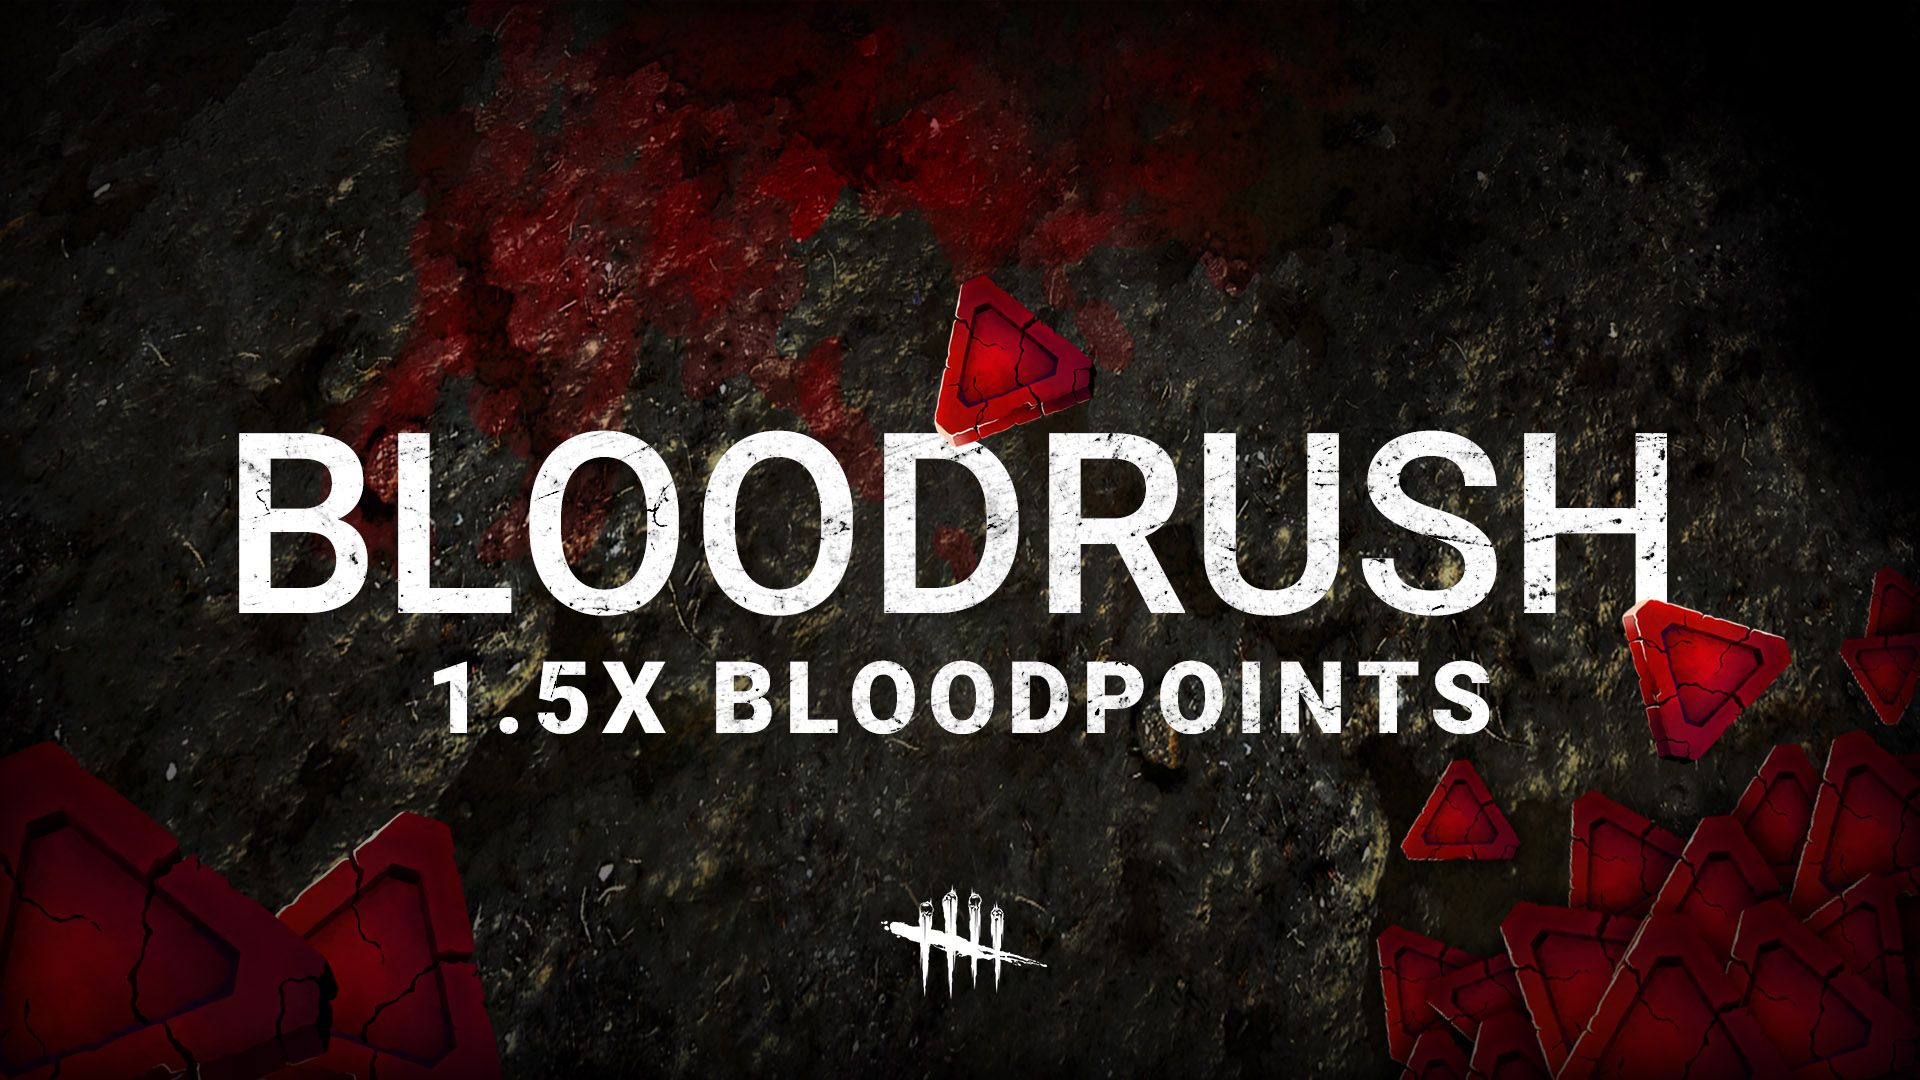 Dead By Daylight Stay Safe Inside And Enjoy The Deadbydaylight Bloodrush 1 5x Bloodpoints Starting At 11 Am Edt On Pc And Console From March 25th To April 15th T Co Zhkf2uulfc